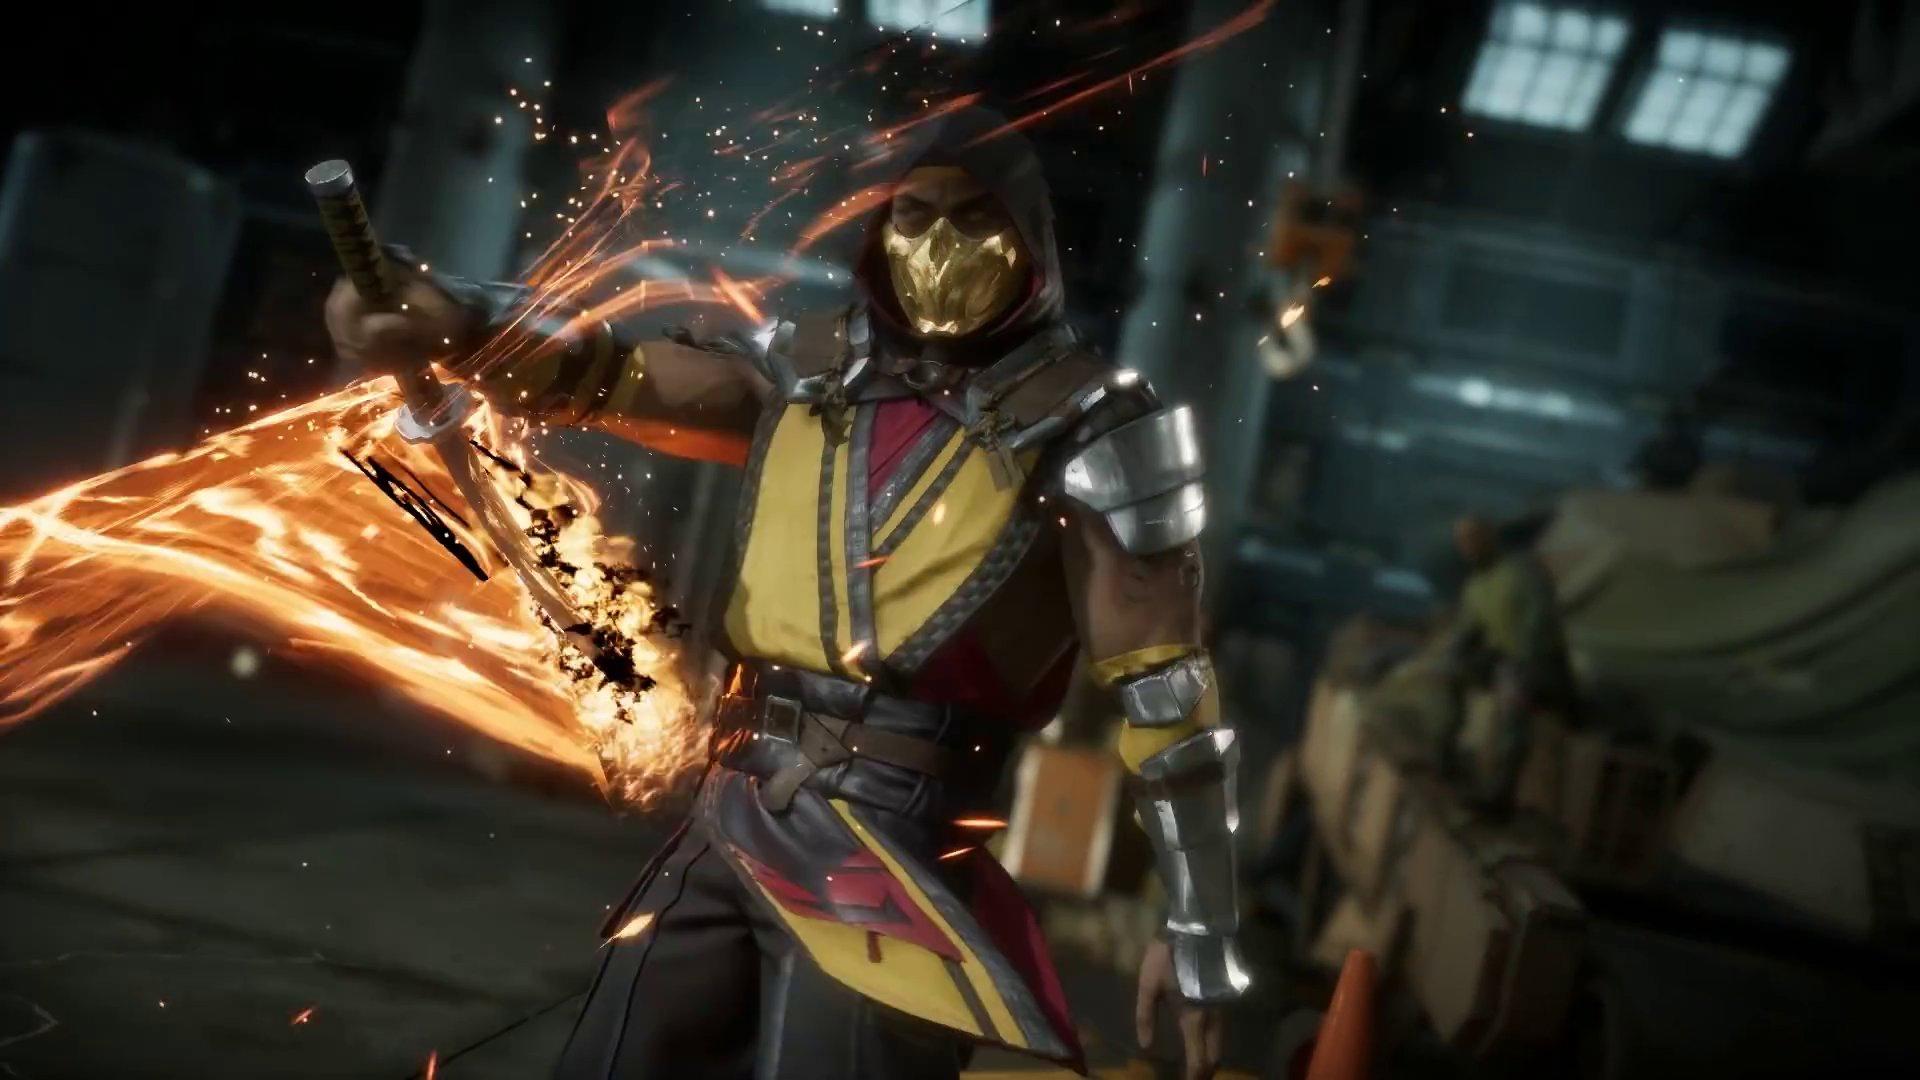 Mortal Kombat 11 Developers Share Their Favourite Fatalities in New